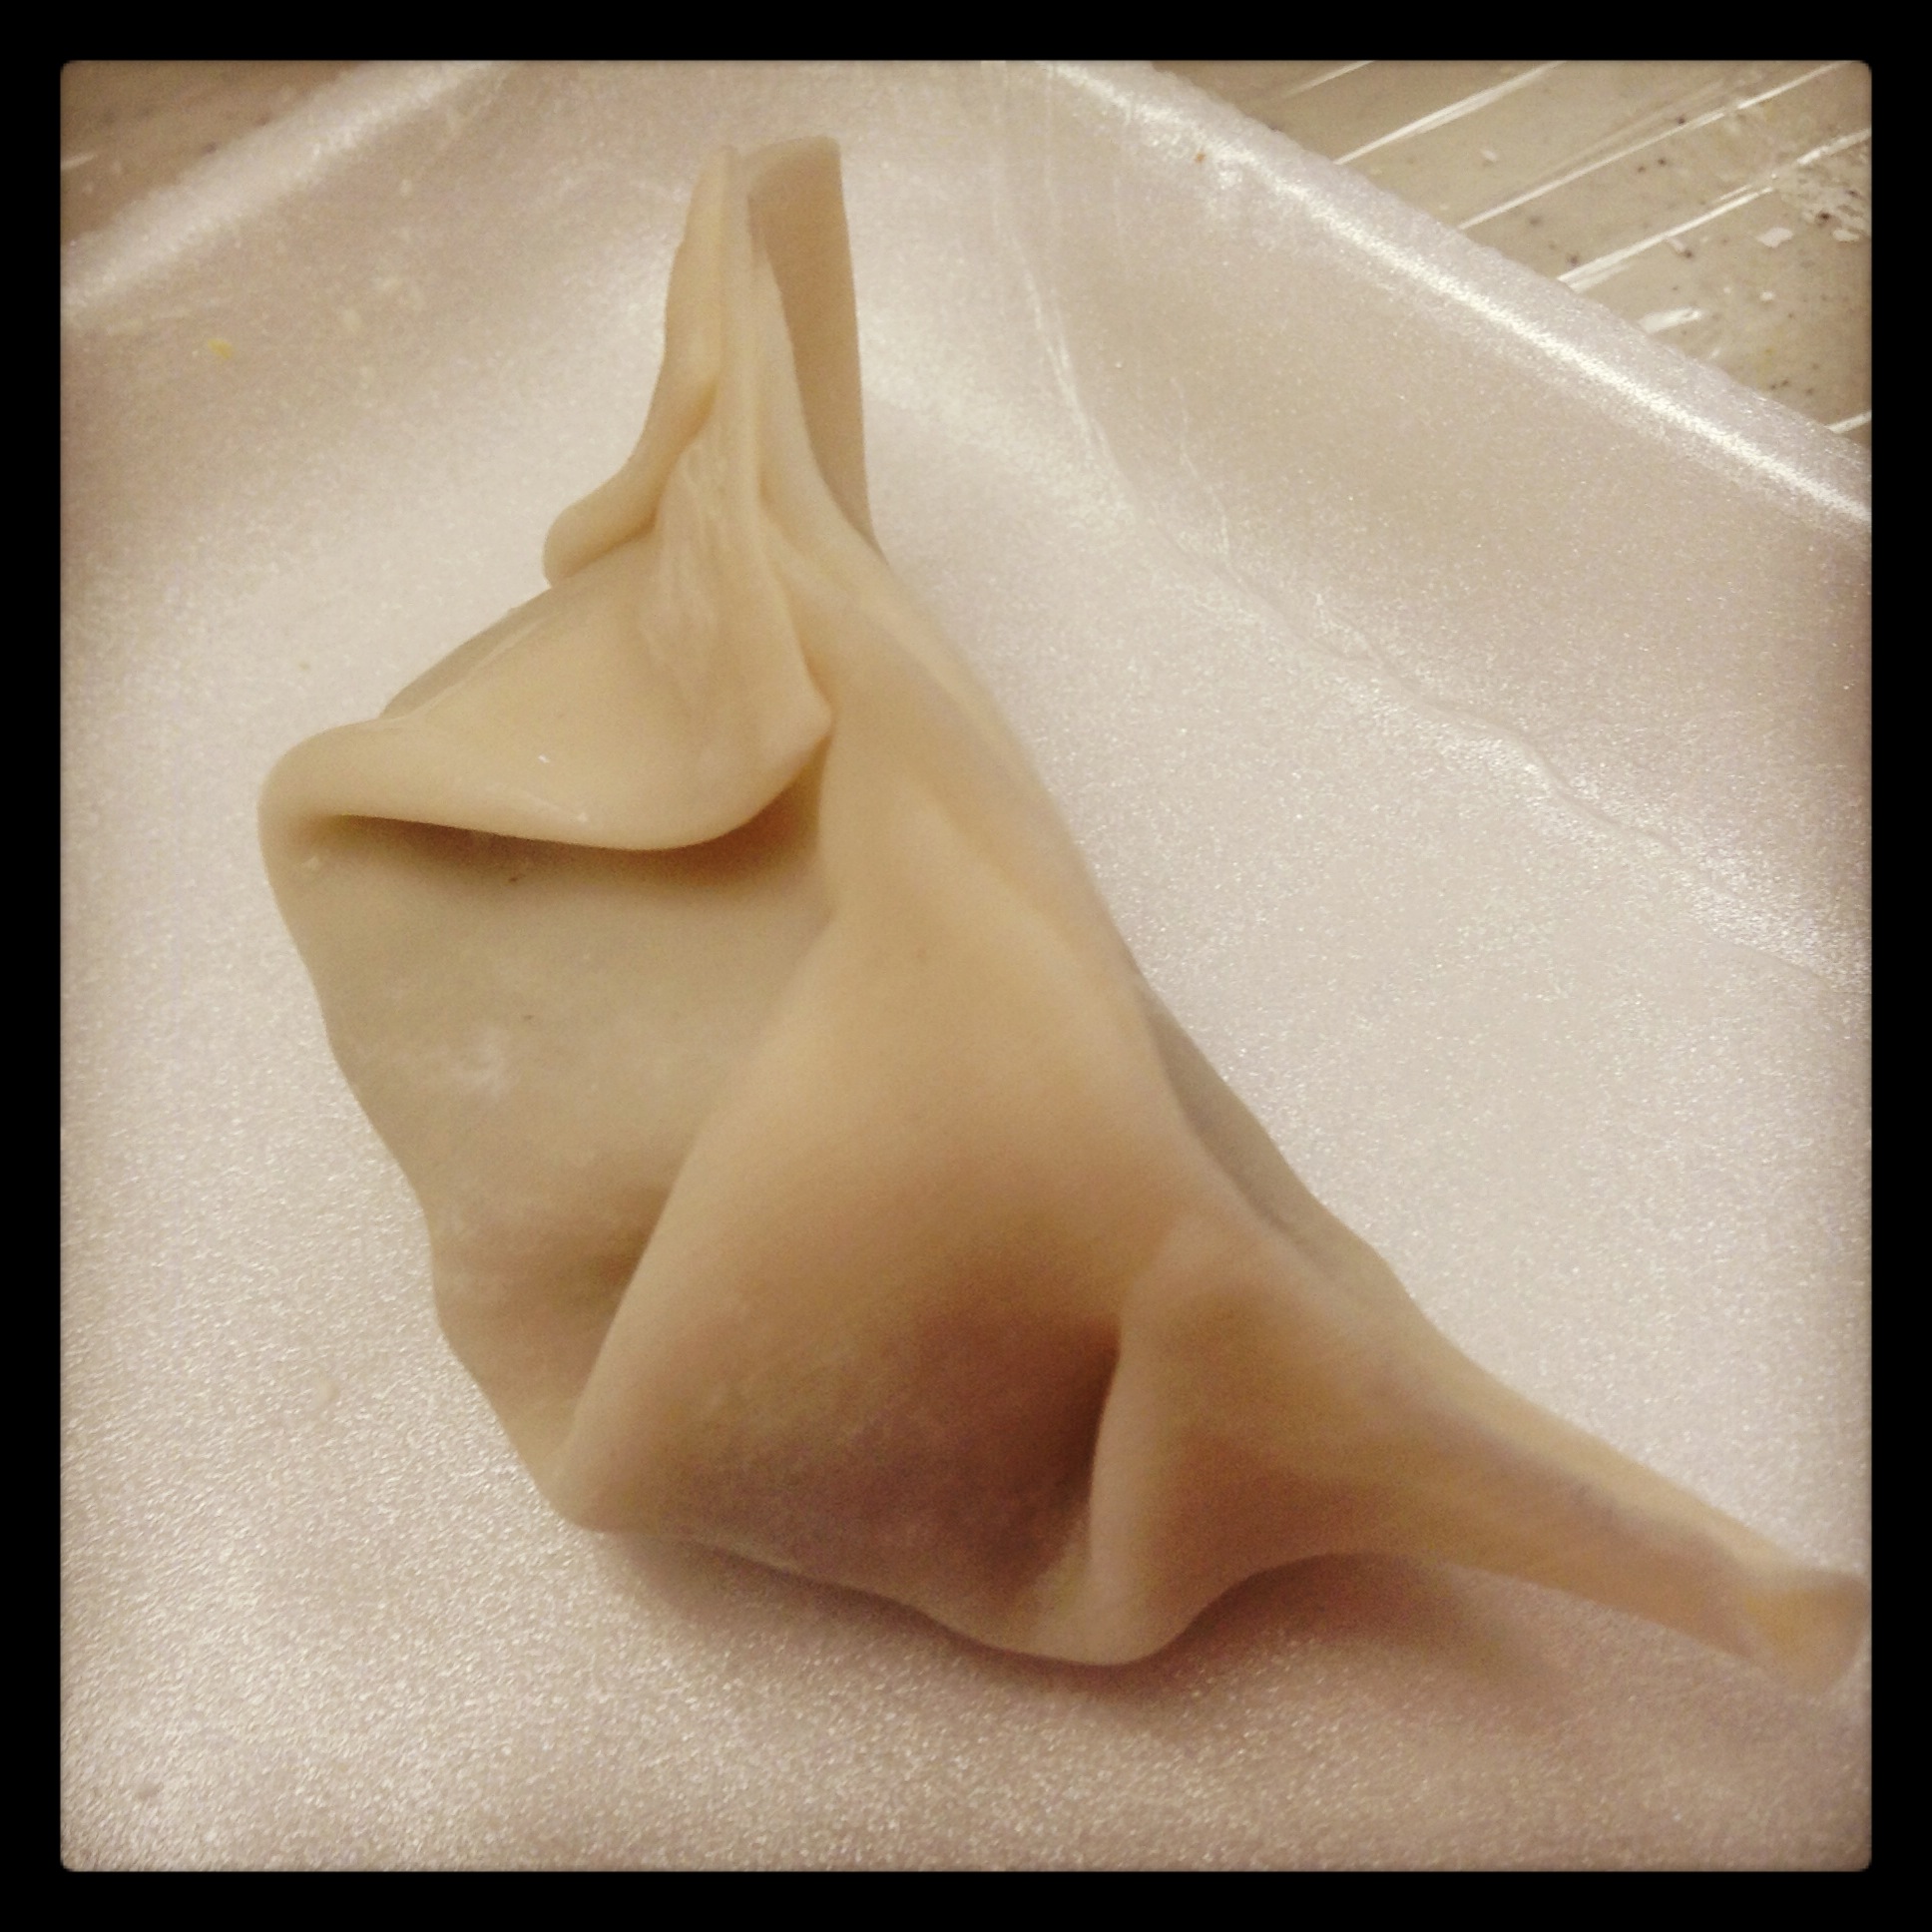 Making dumplings for the year of the horse. Photo: Amy Wu